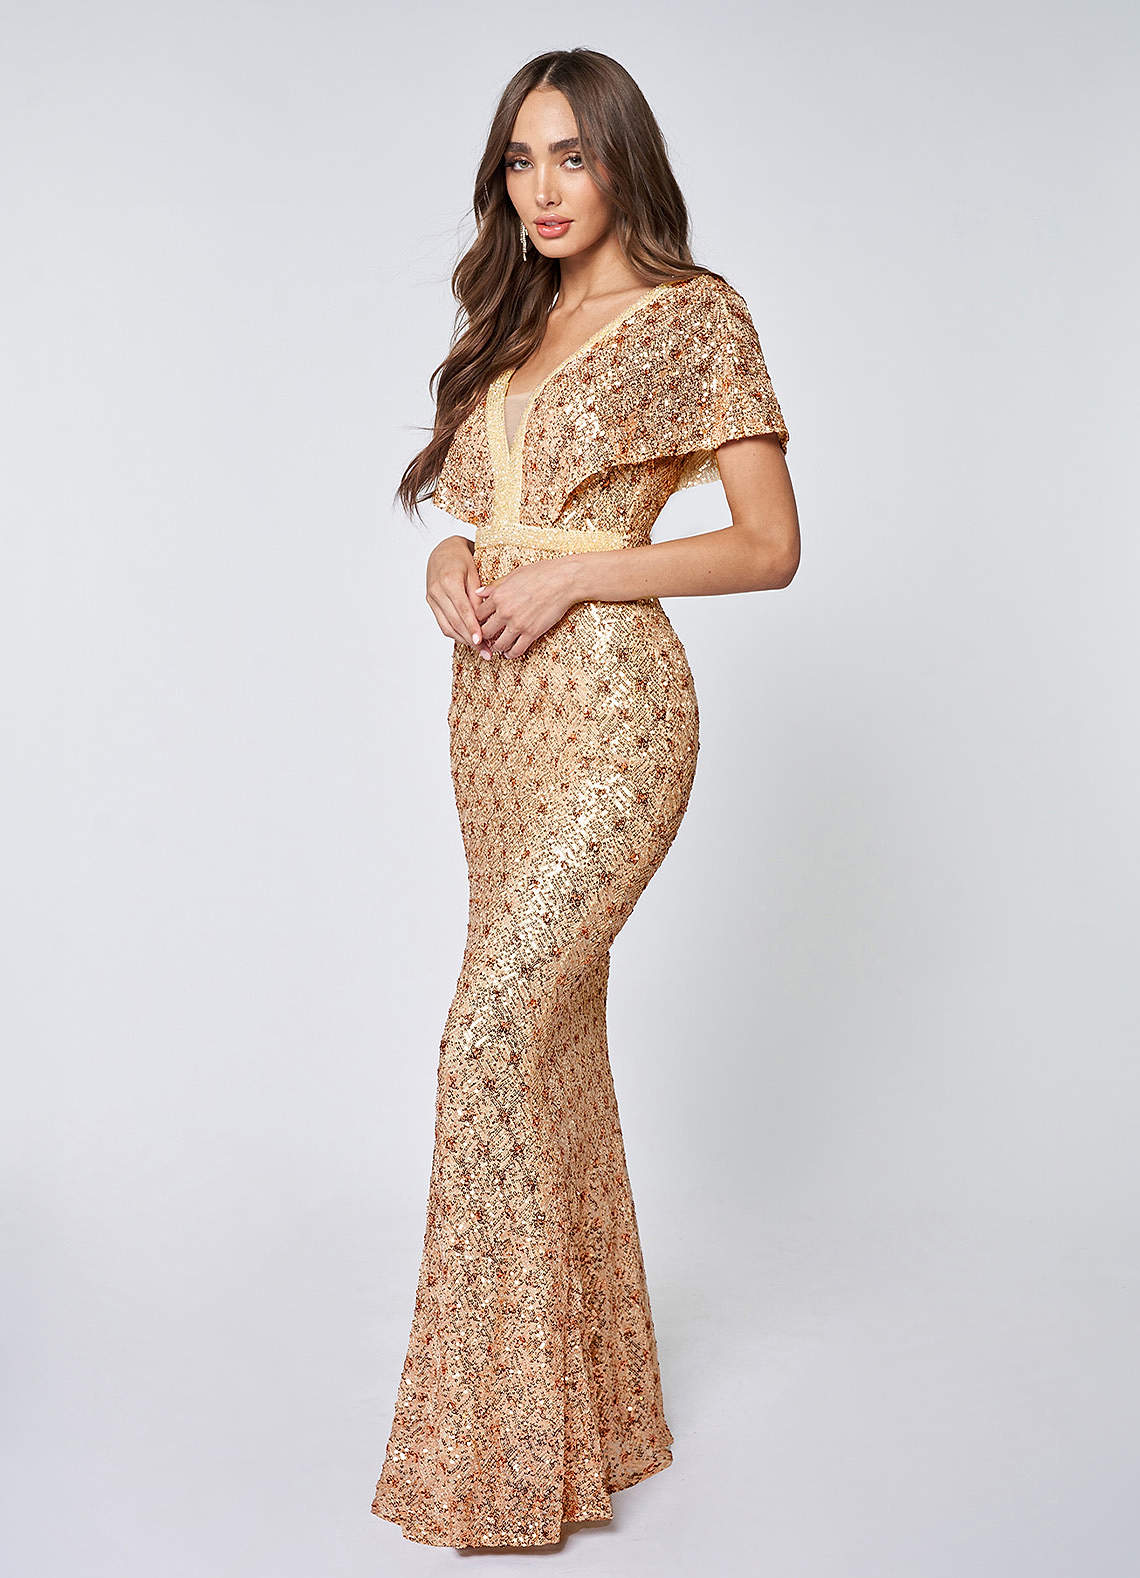 Glam Sweetheart Champagne Sequin Maxi Dress image1